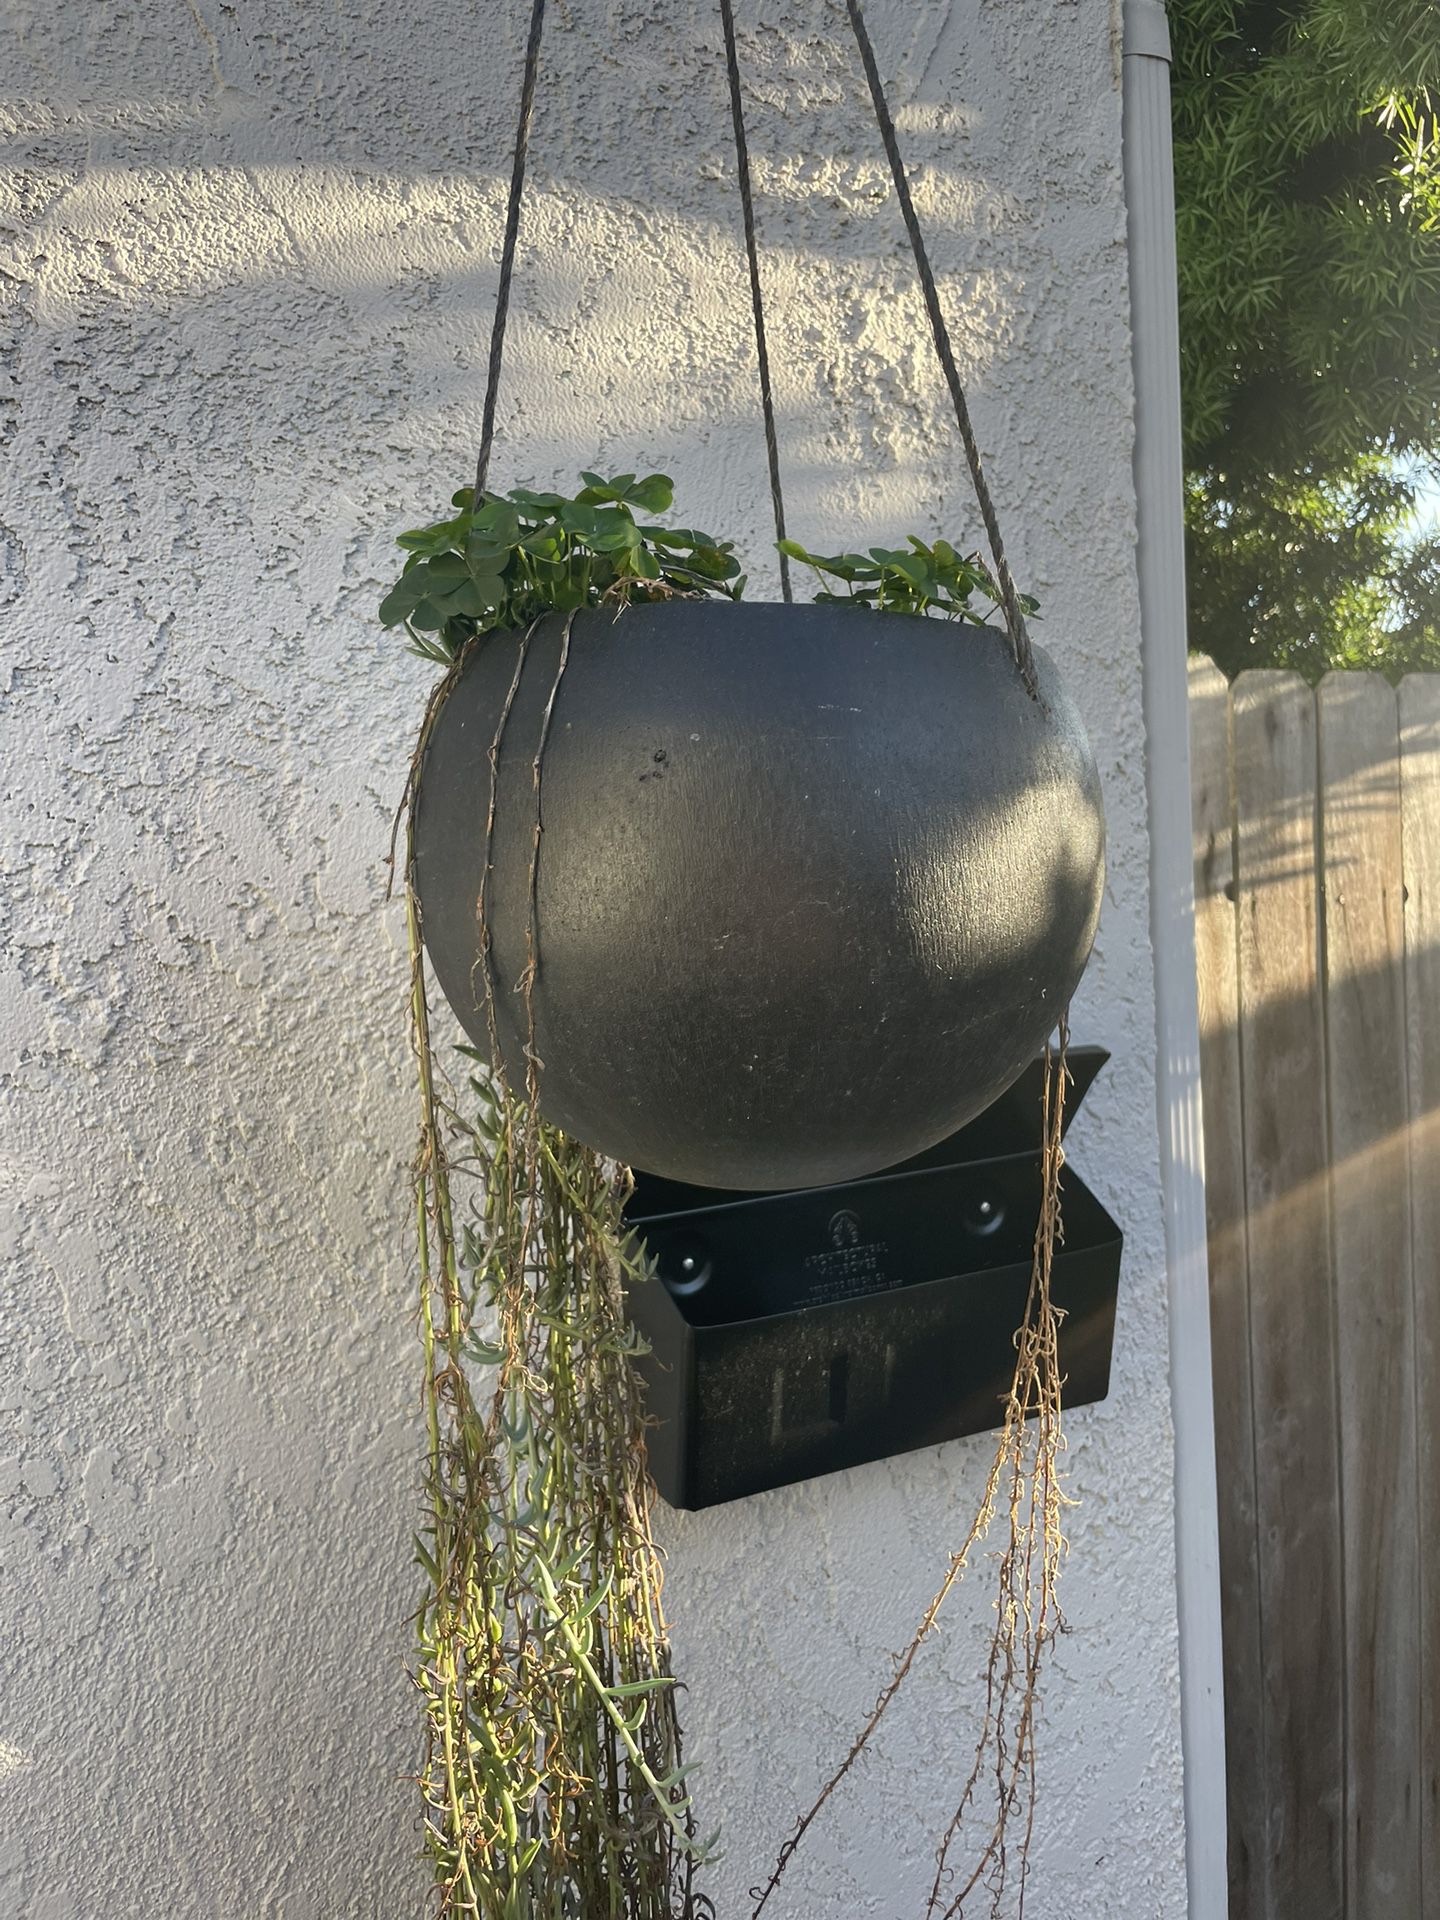 Hanging Planter And Fire Sticks Plants